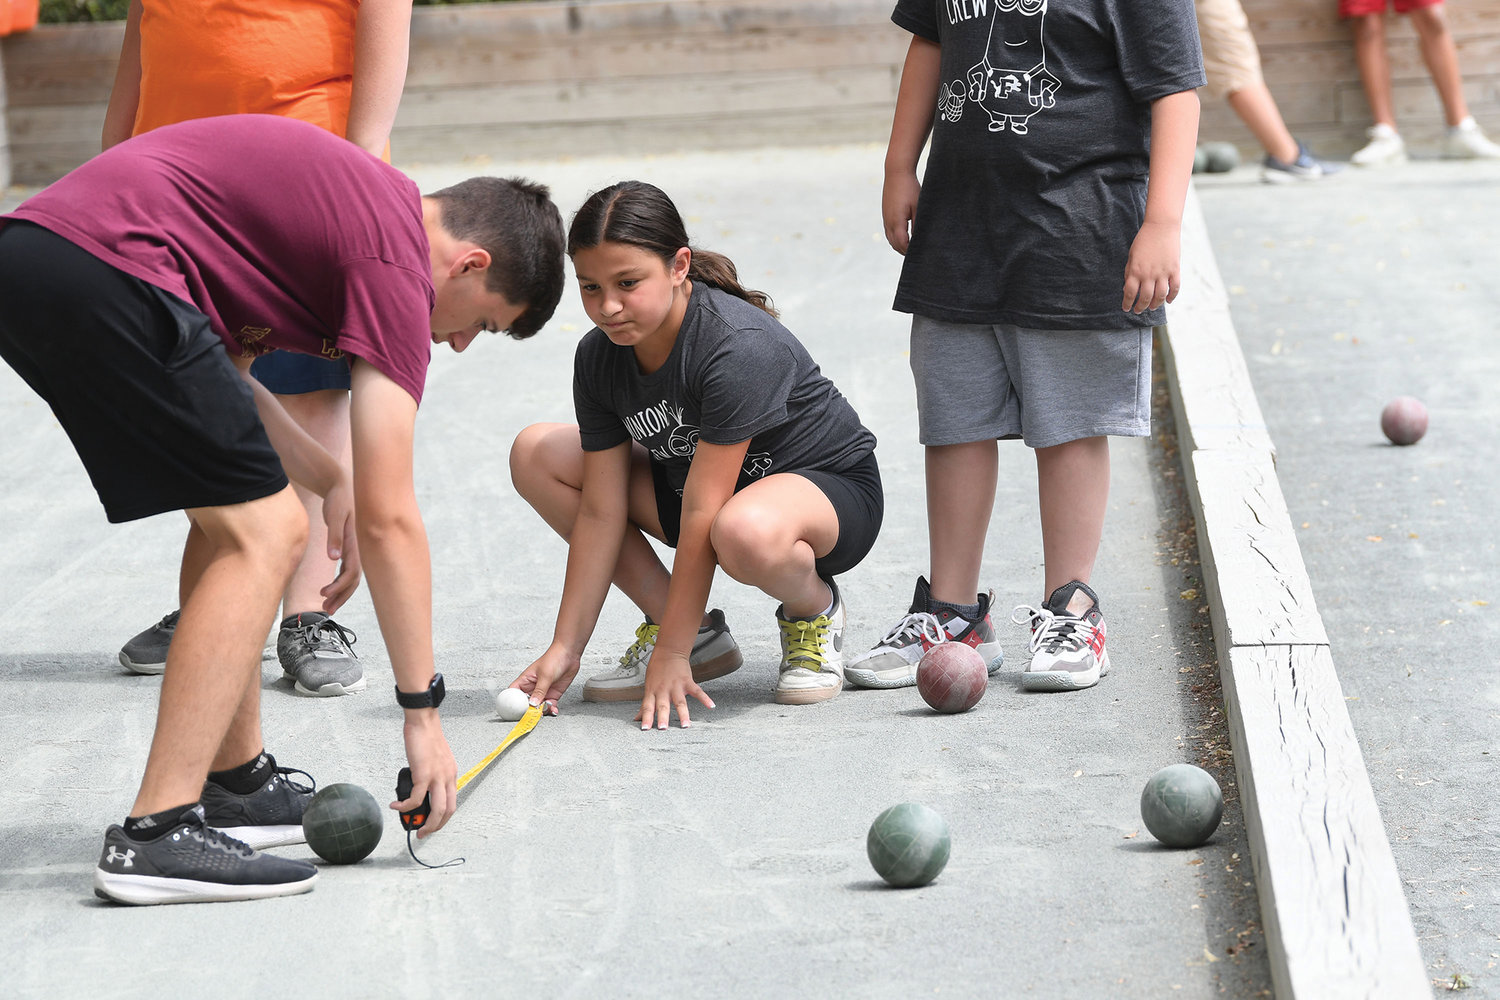 Joe Costa, Msgr. Farrell student and camp counselor, at left, assists as players measure the distance from the bocce ball to the pallino.